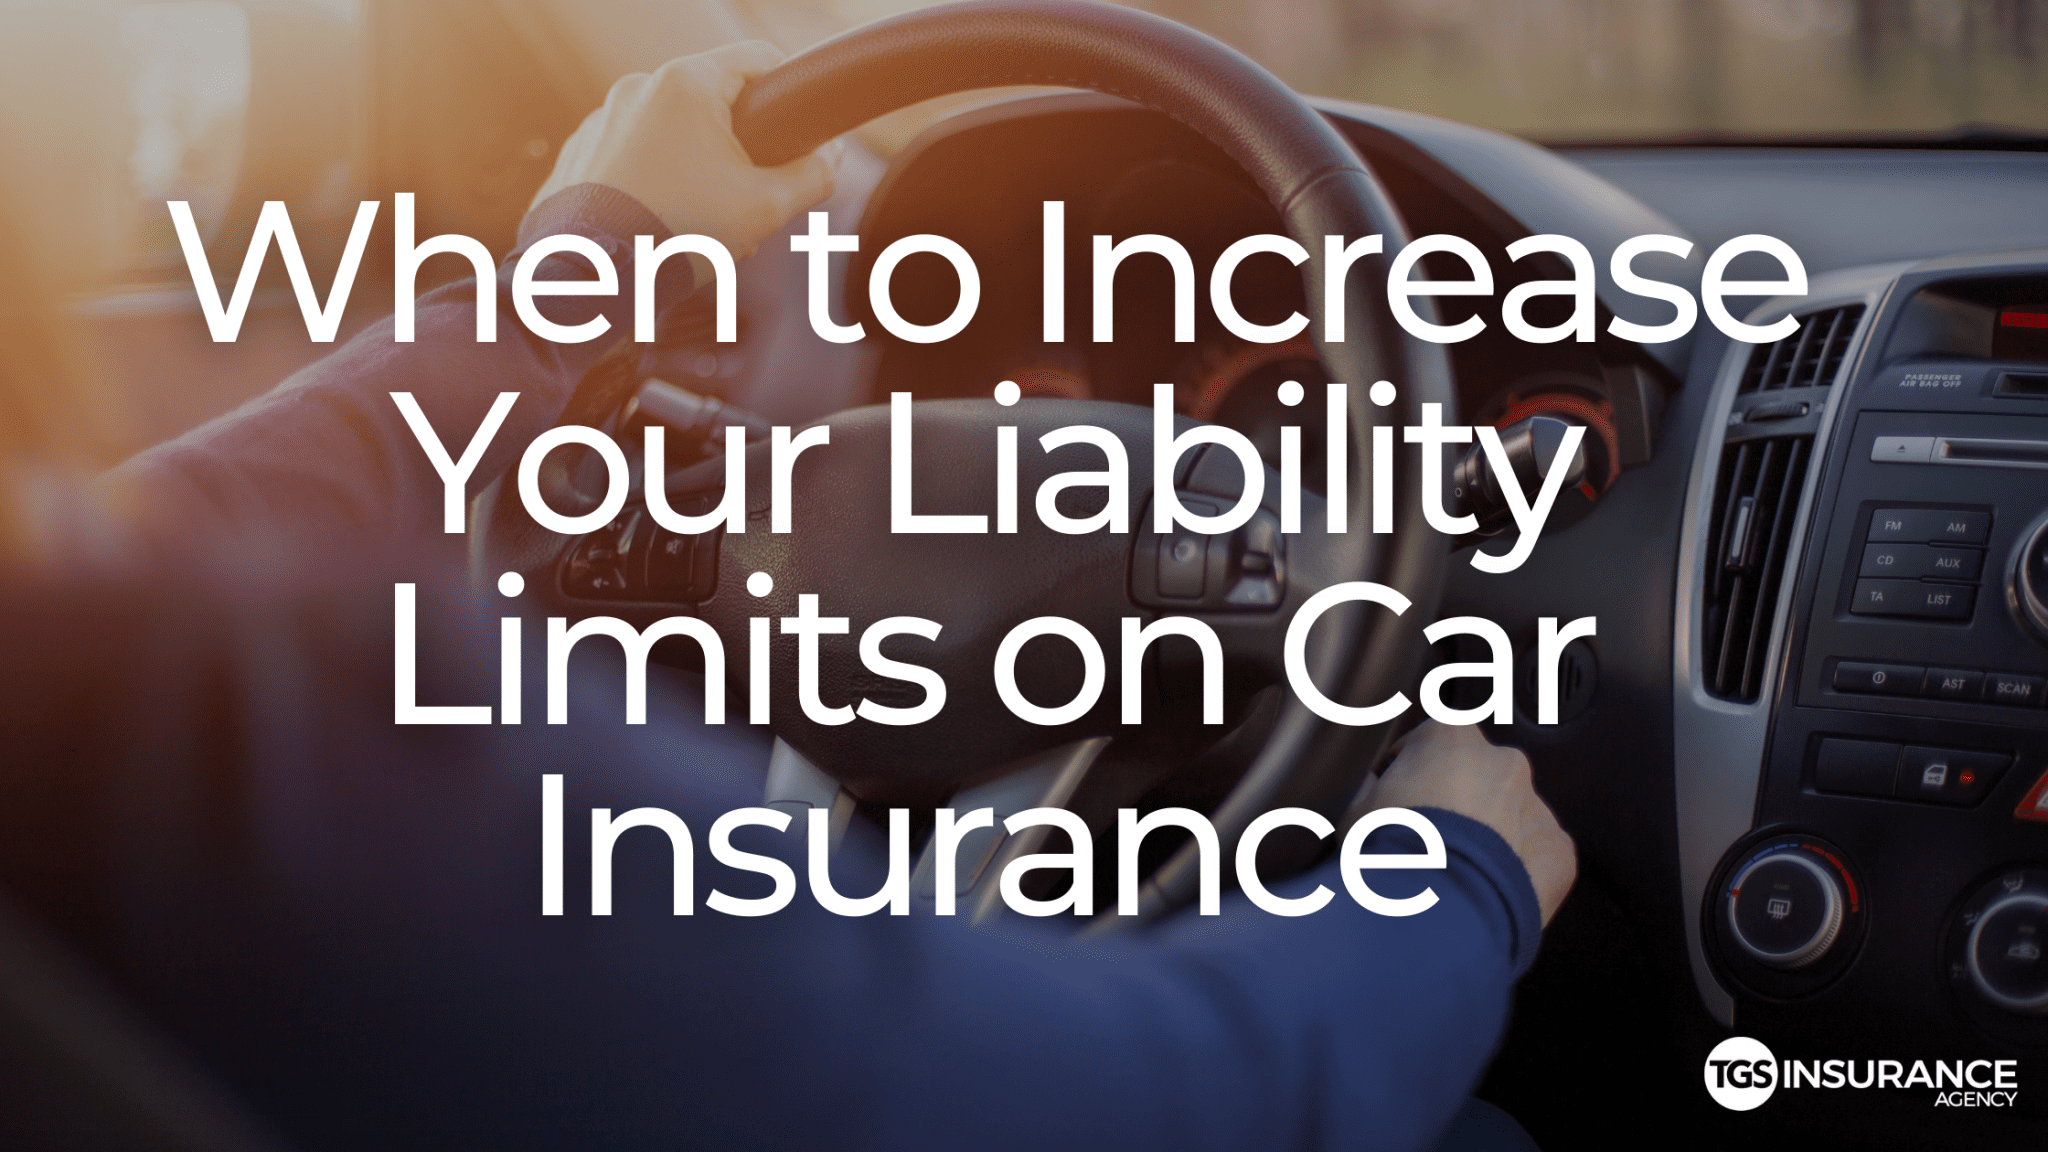 When to Increase Your Liability Limits on Car Insurance